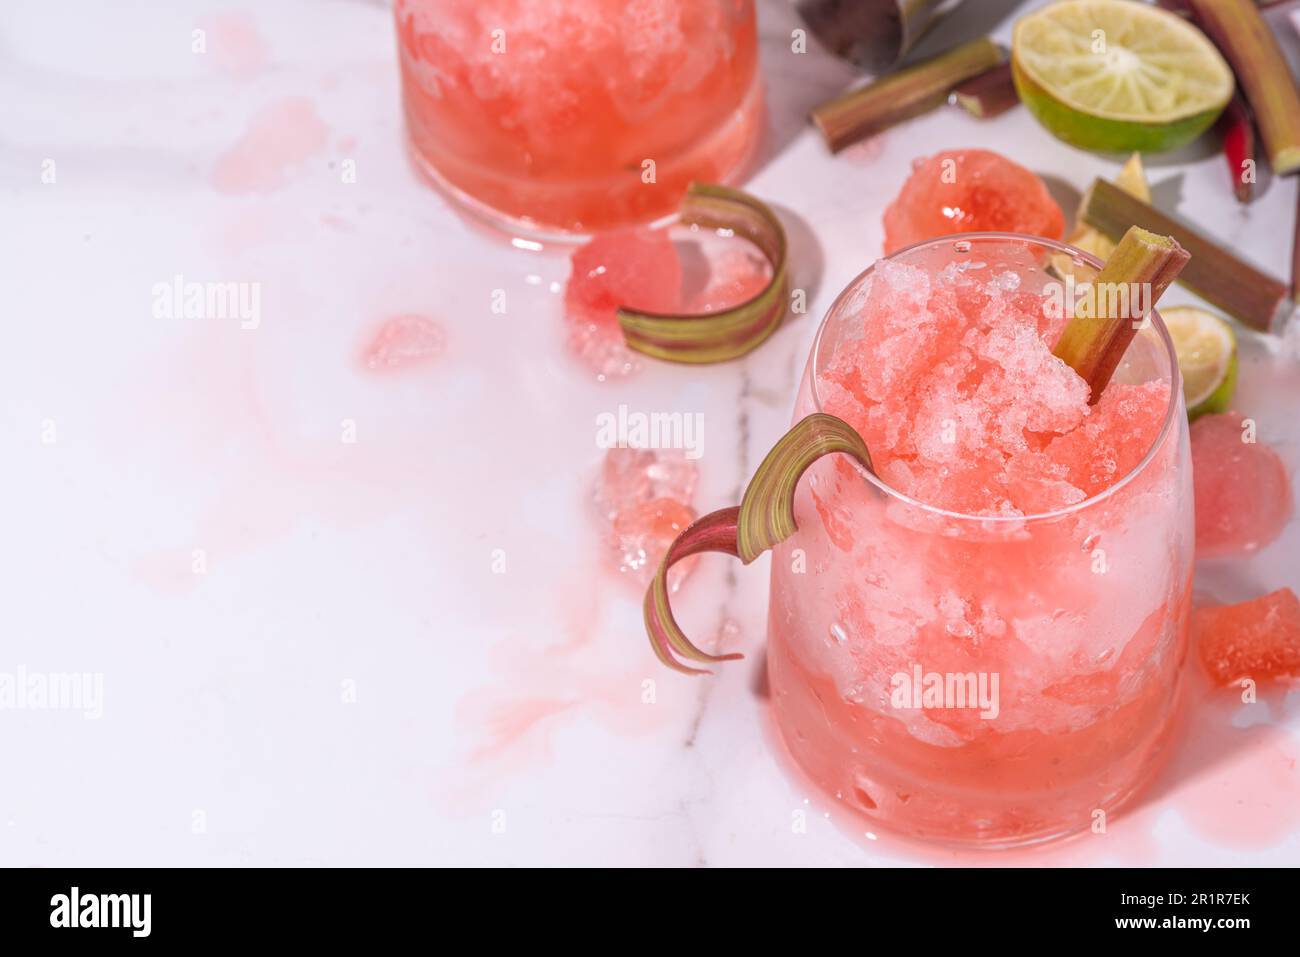 https://c8.alamy.com/comp/2R1R7EK/refreshing-summer-rhubarb-sour-fizz-cocktail-frozen-fizz-cocktail-sweet-rhubarb-slushy-with-sirup-rum-and-champagne-refreshing-cold-and-healthy-s-2R1R7EK.jpg